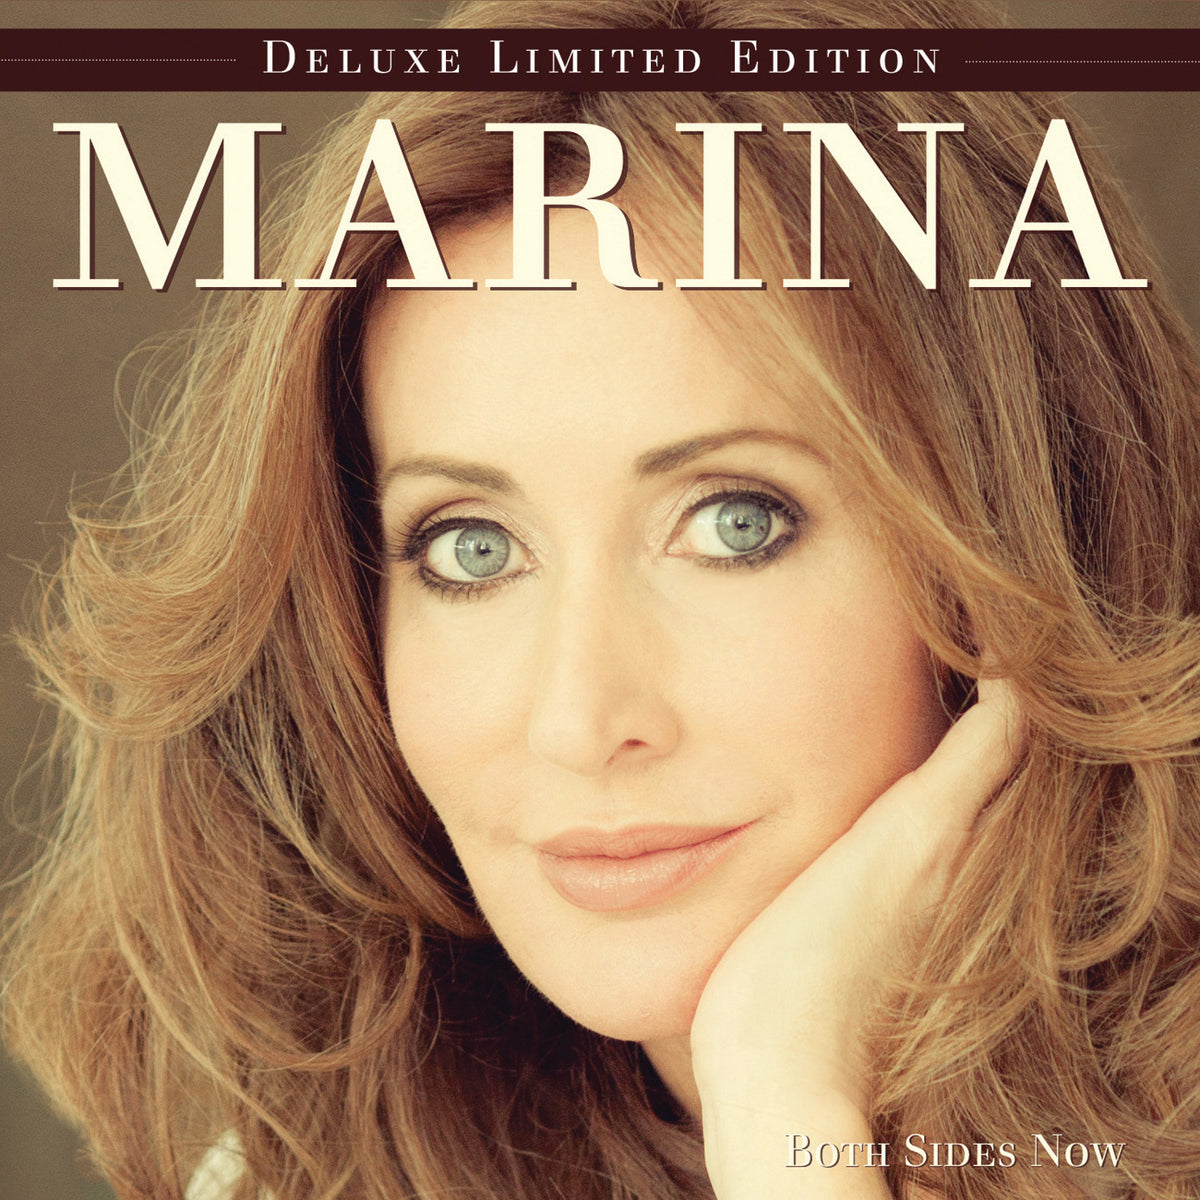 MARINA PRIOR - BOTH SIDES NOW (2 CD DELUXE)